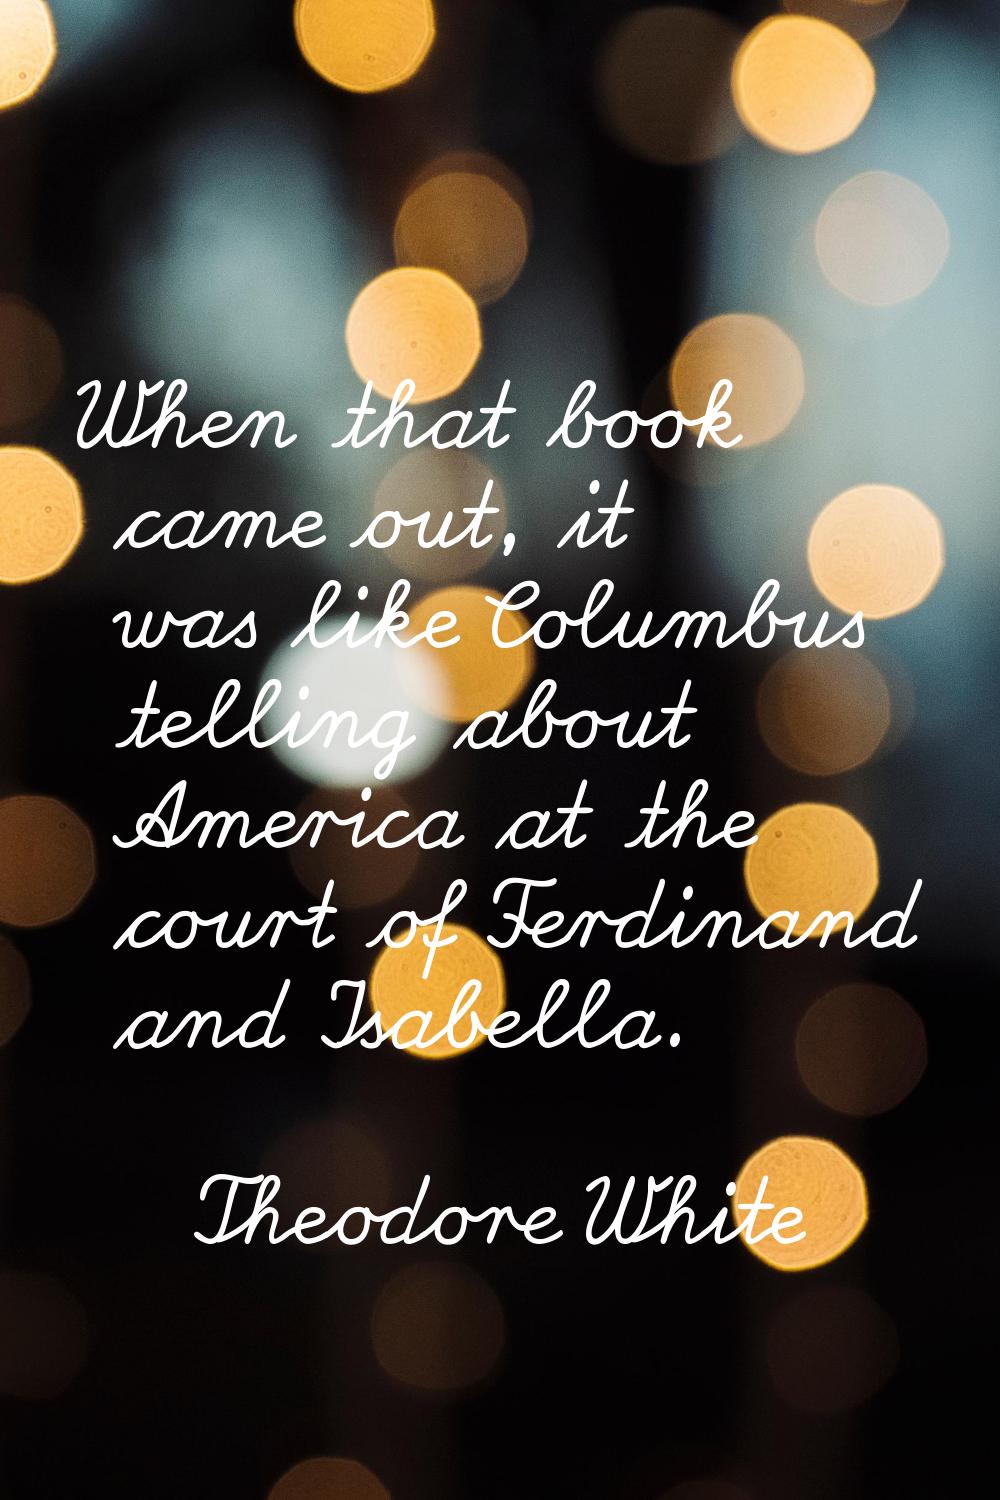 When that book came out, it was like Columbus telling about America at the court of Ferdinand and I